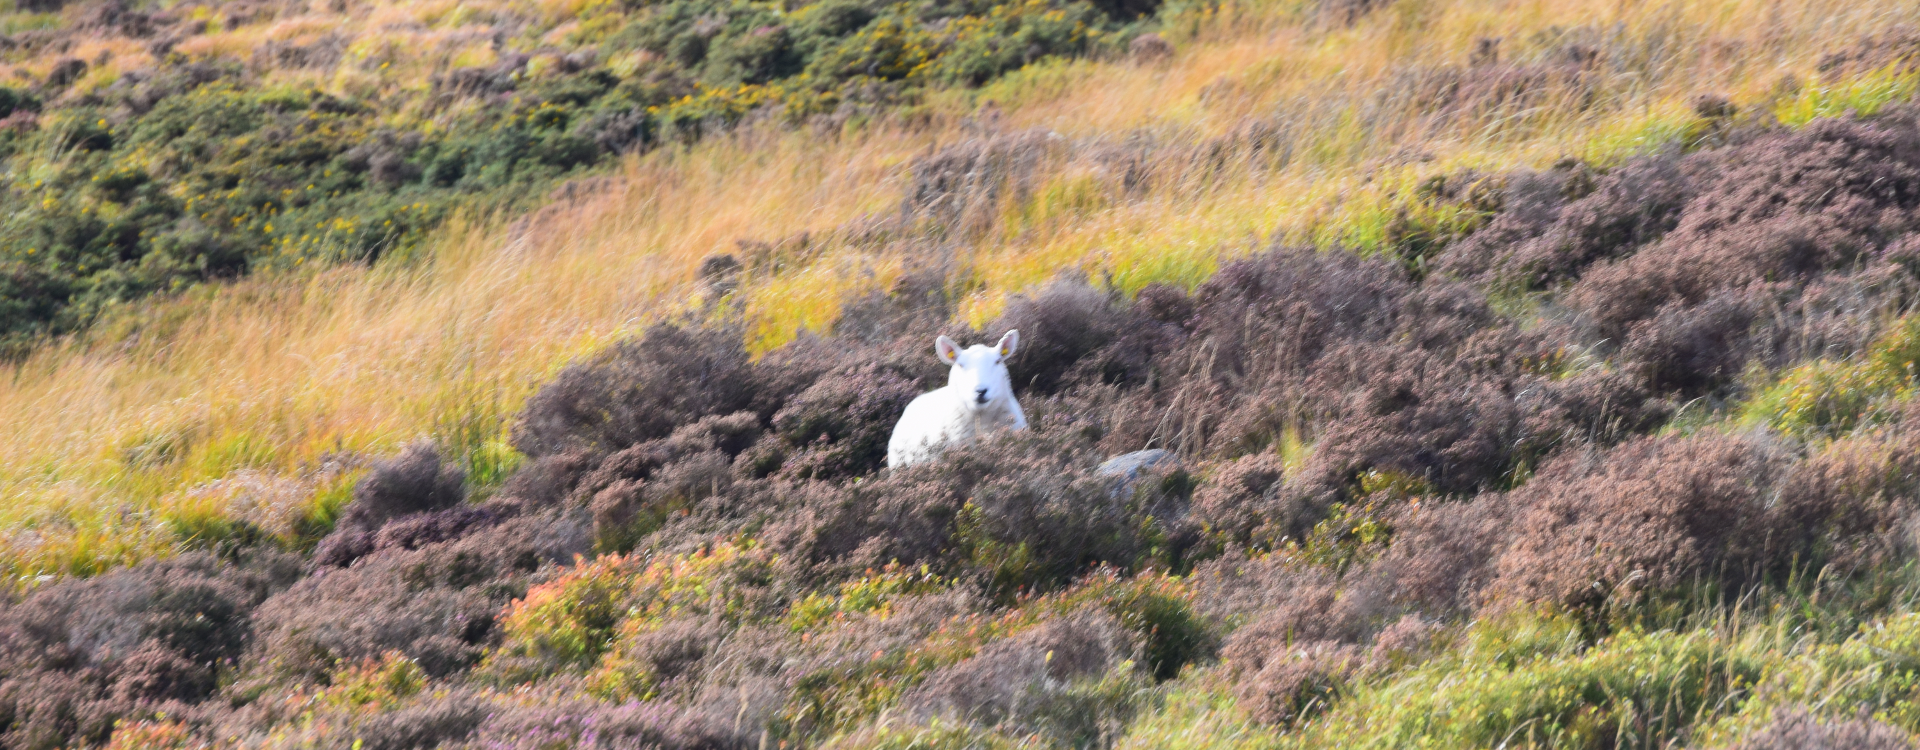 A solitary sheep on the side of the mountain amongst grass